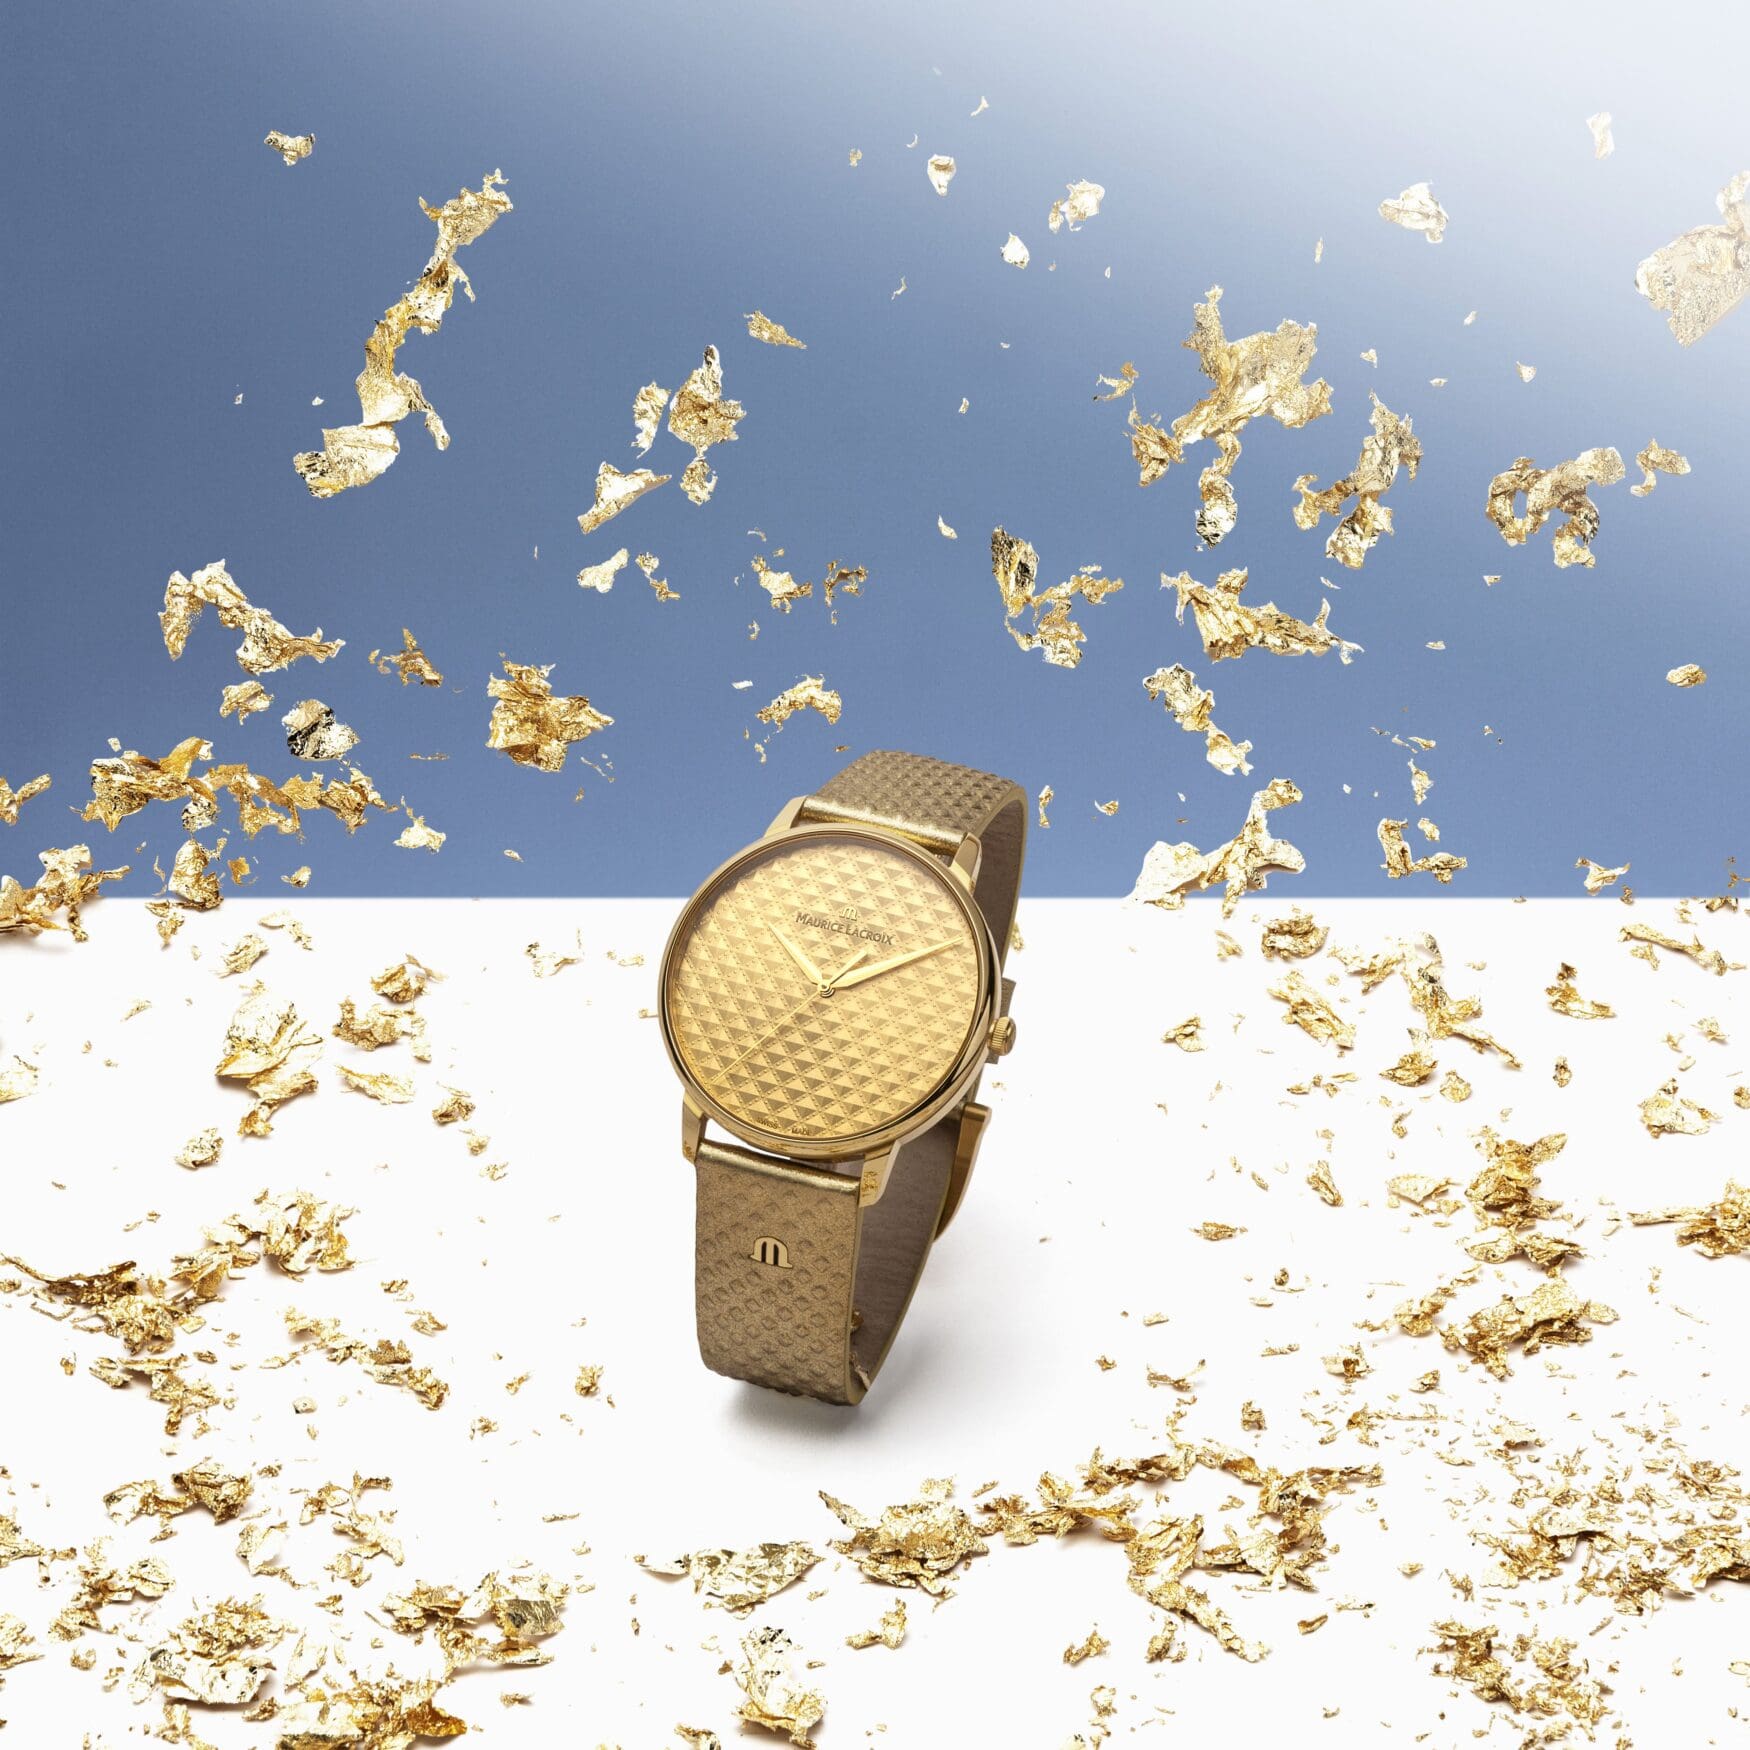 FRIDAY WIND DOWN: Maurice Lacroix just dropped some affordable luxury sunshine for the wrist